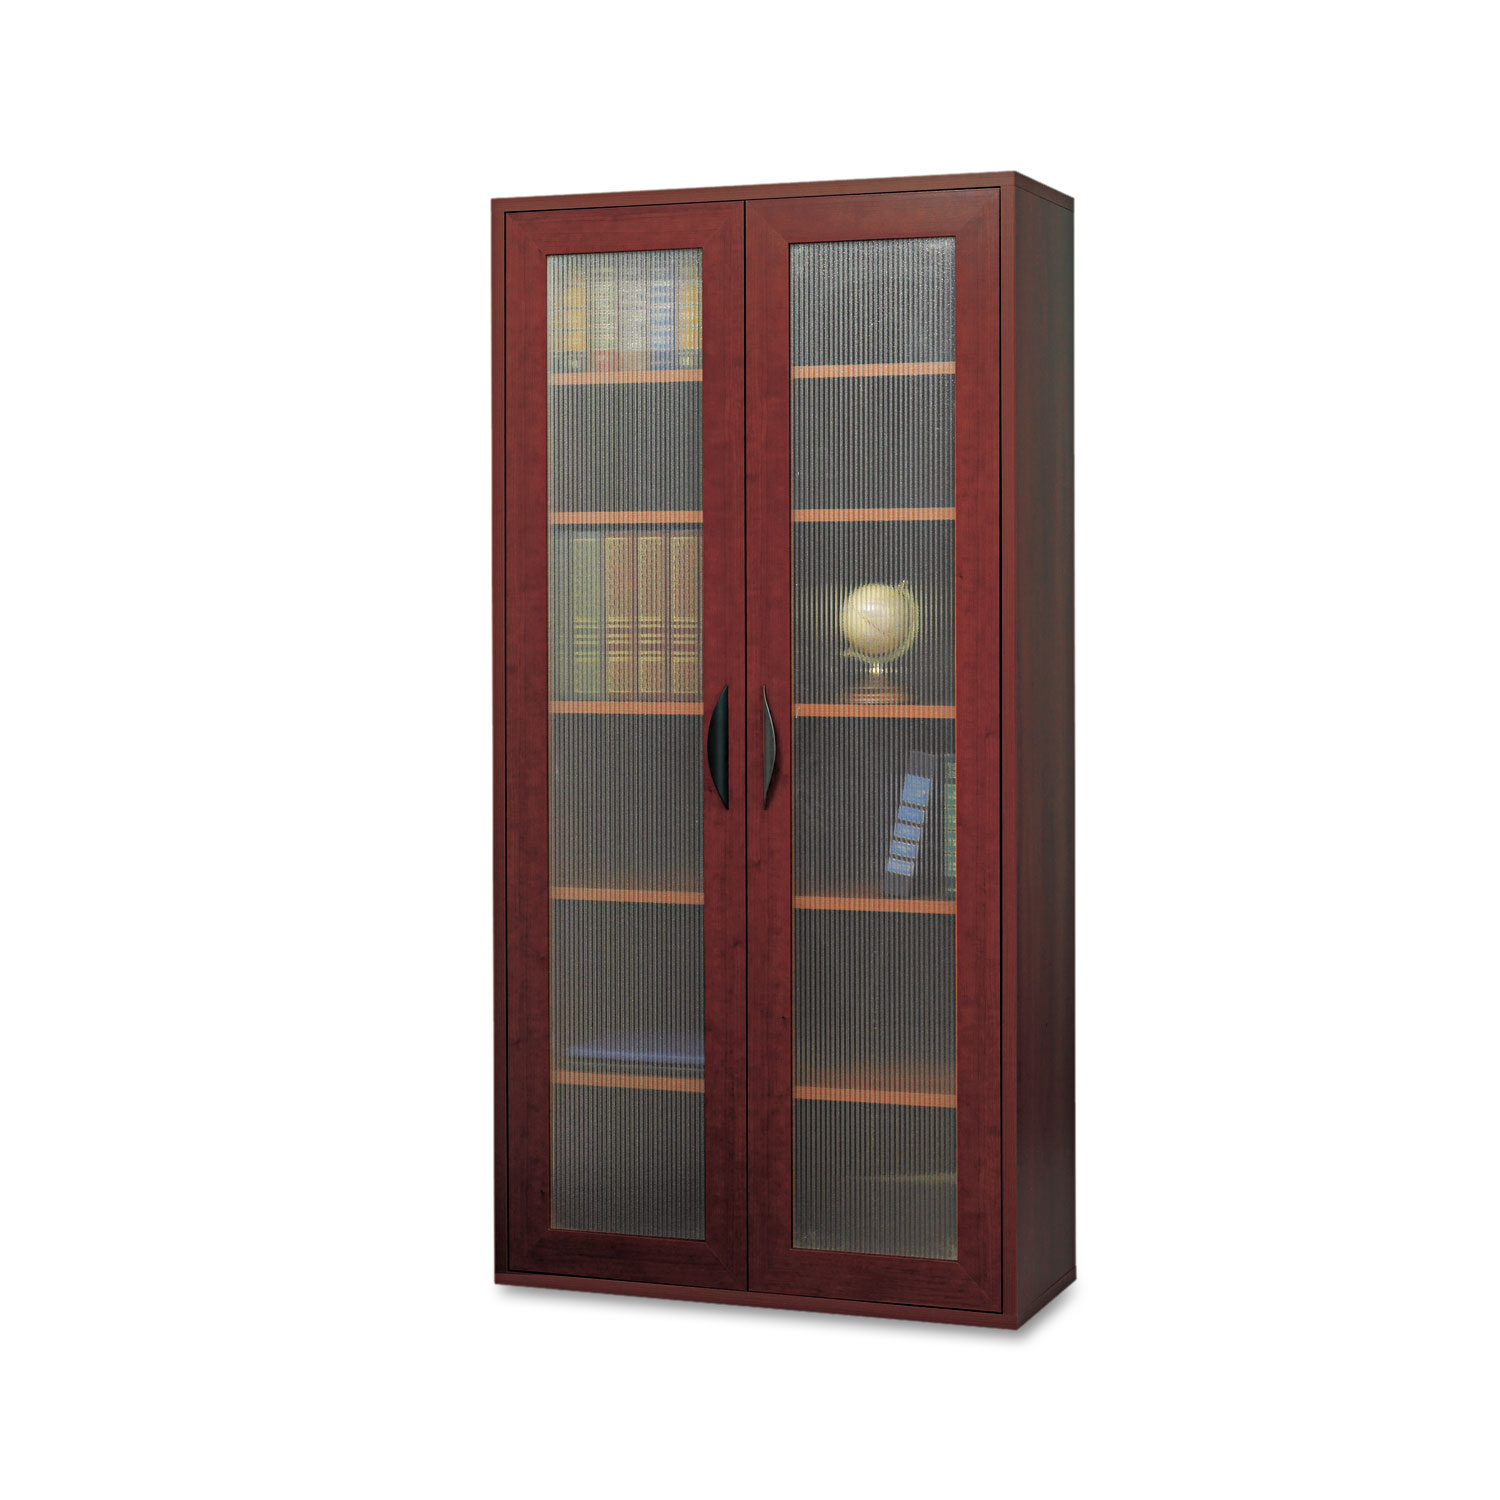 Safco Apr&#232;s Tall Two-Door Cabinet, 29-3/4w x 11-3/4d x 59-1/2h, Mahogany